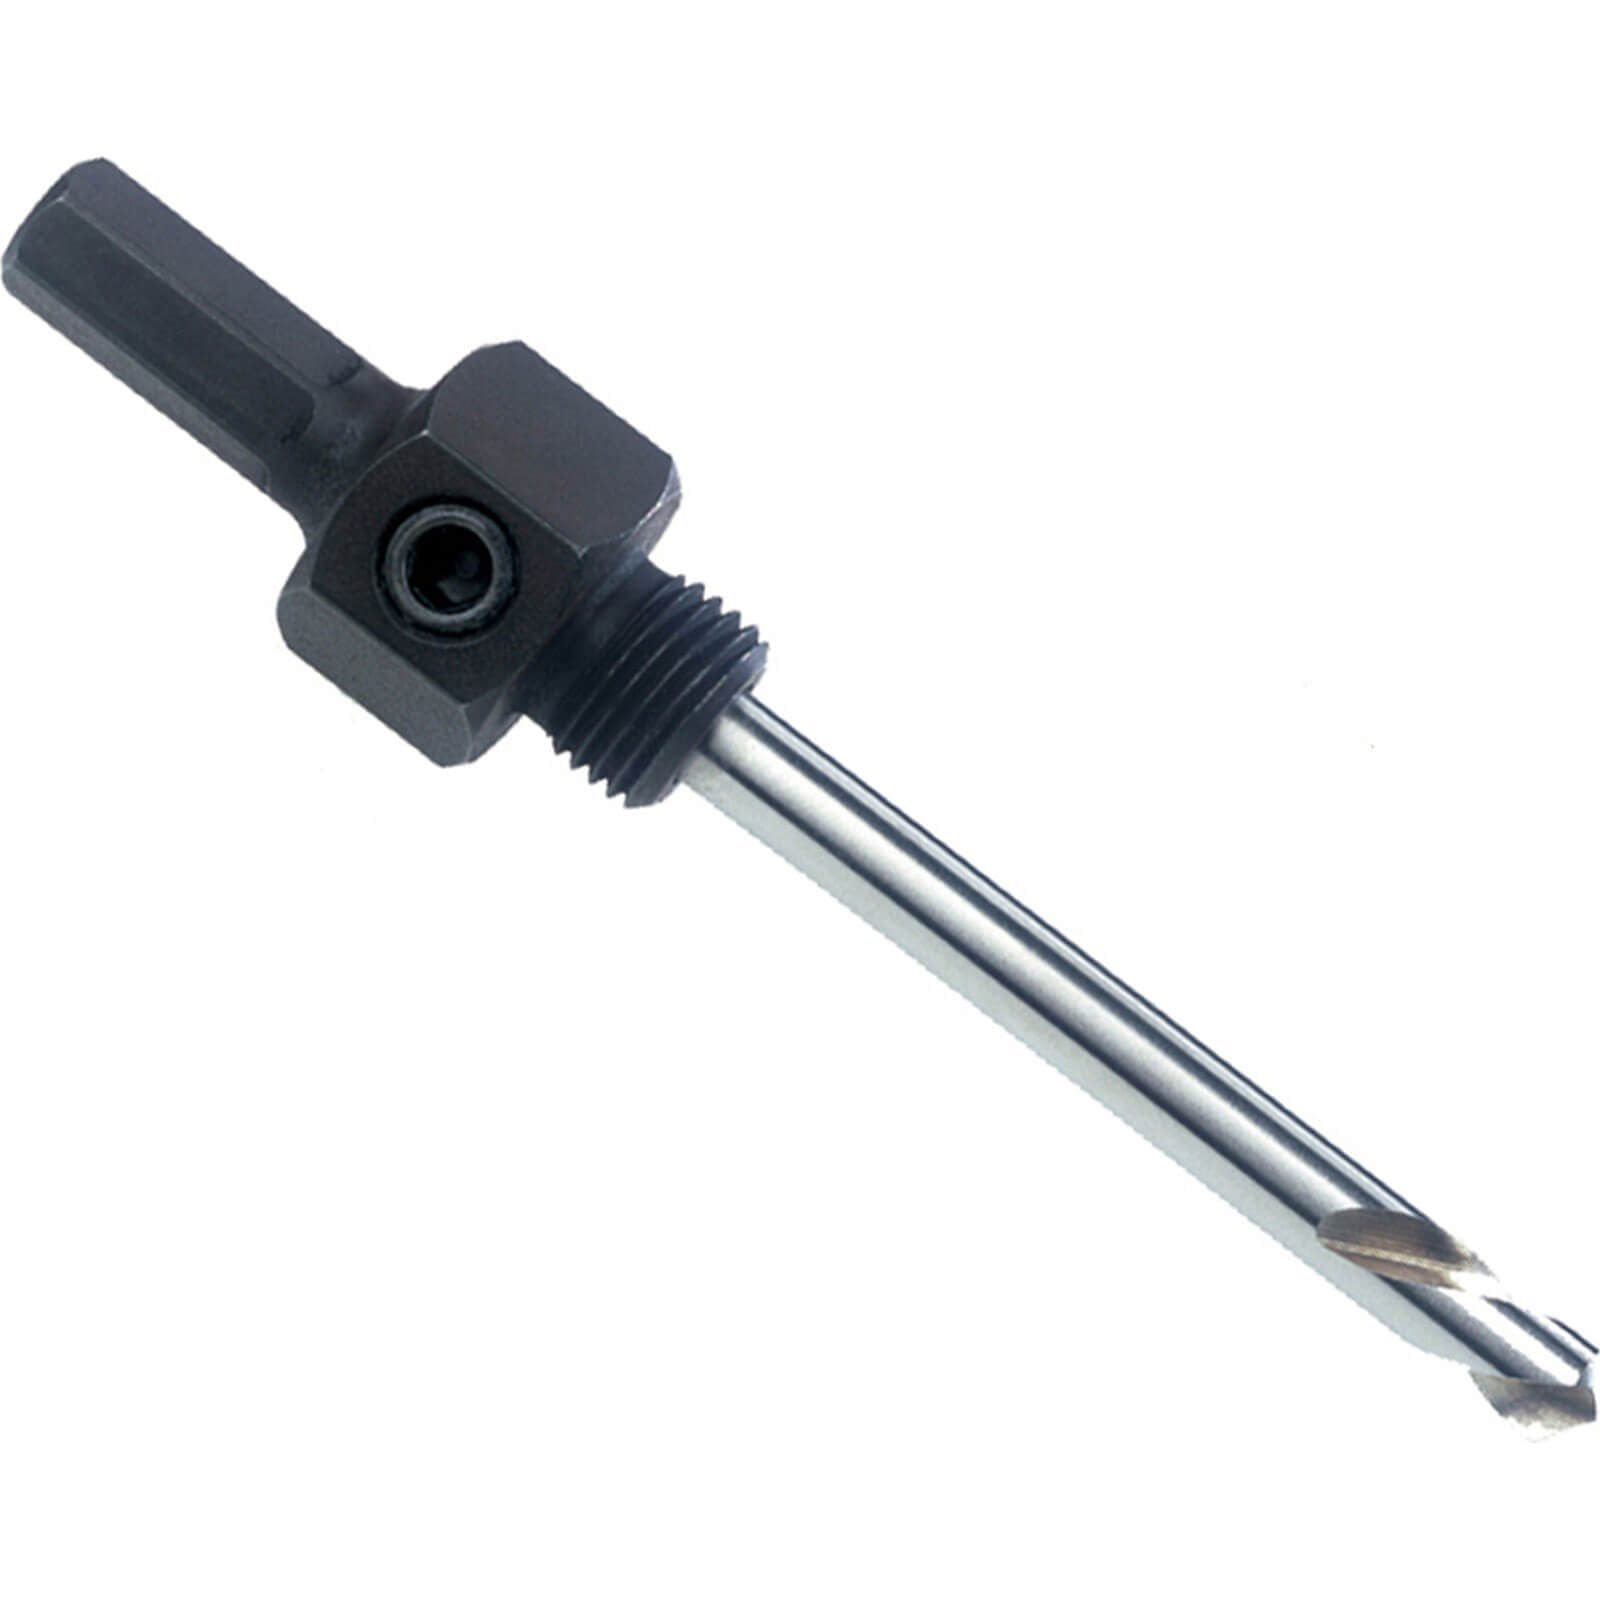 Image of Bahco Arbor 6.4mm Shank To Suit 14mm - 30mm Hole Saws